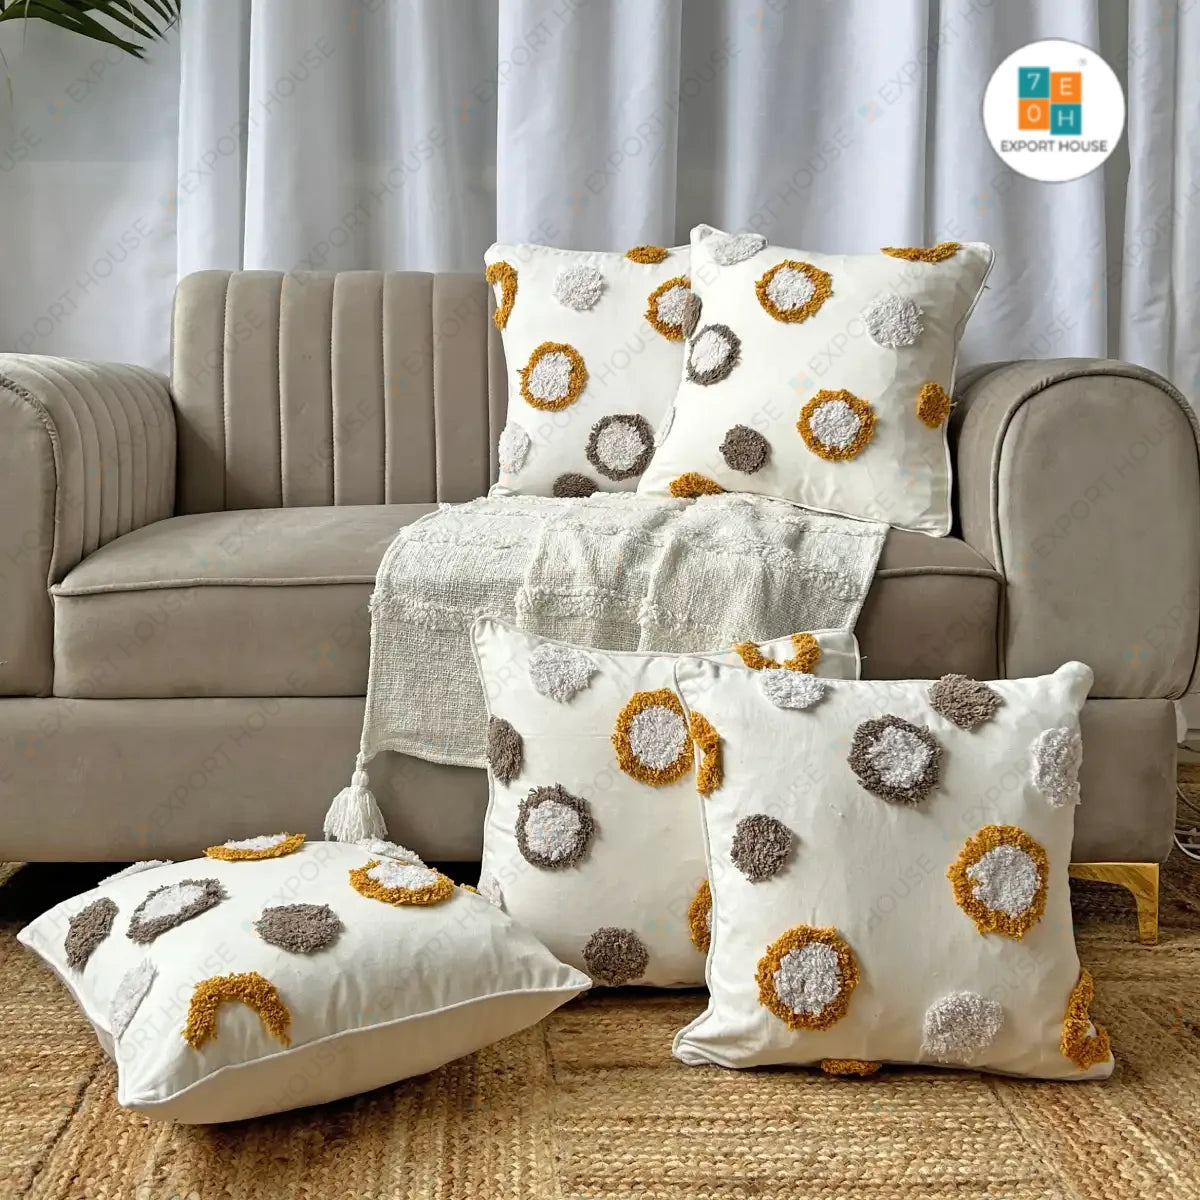 Luxurious 16x16 Inch Cotton Tufted Cushion Covers: Double Dots Home Decor Delight